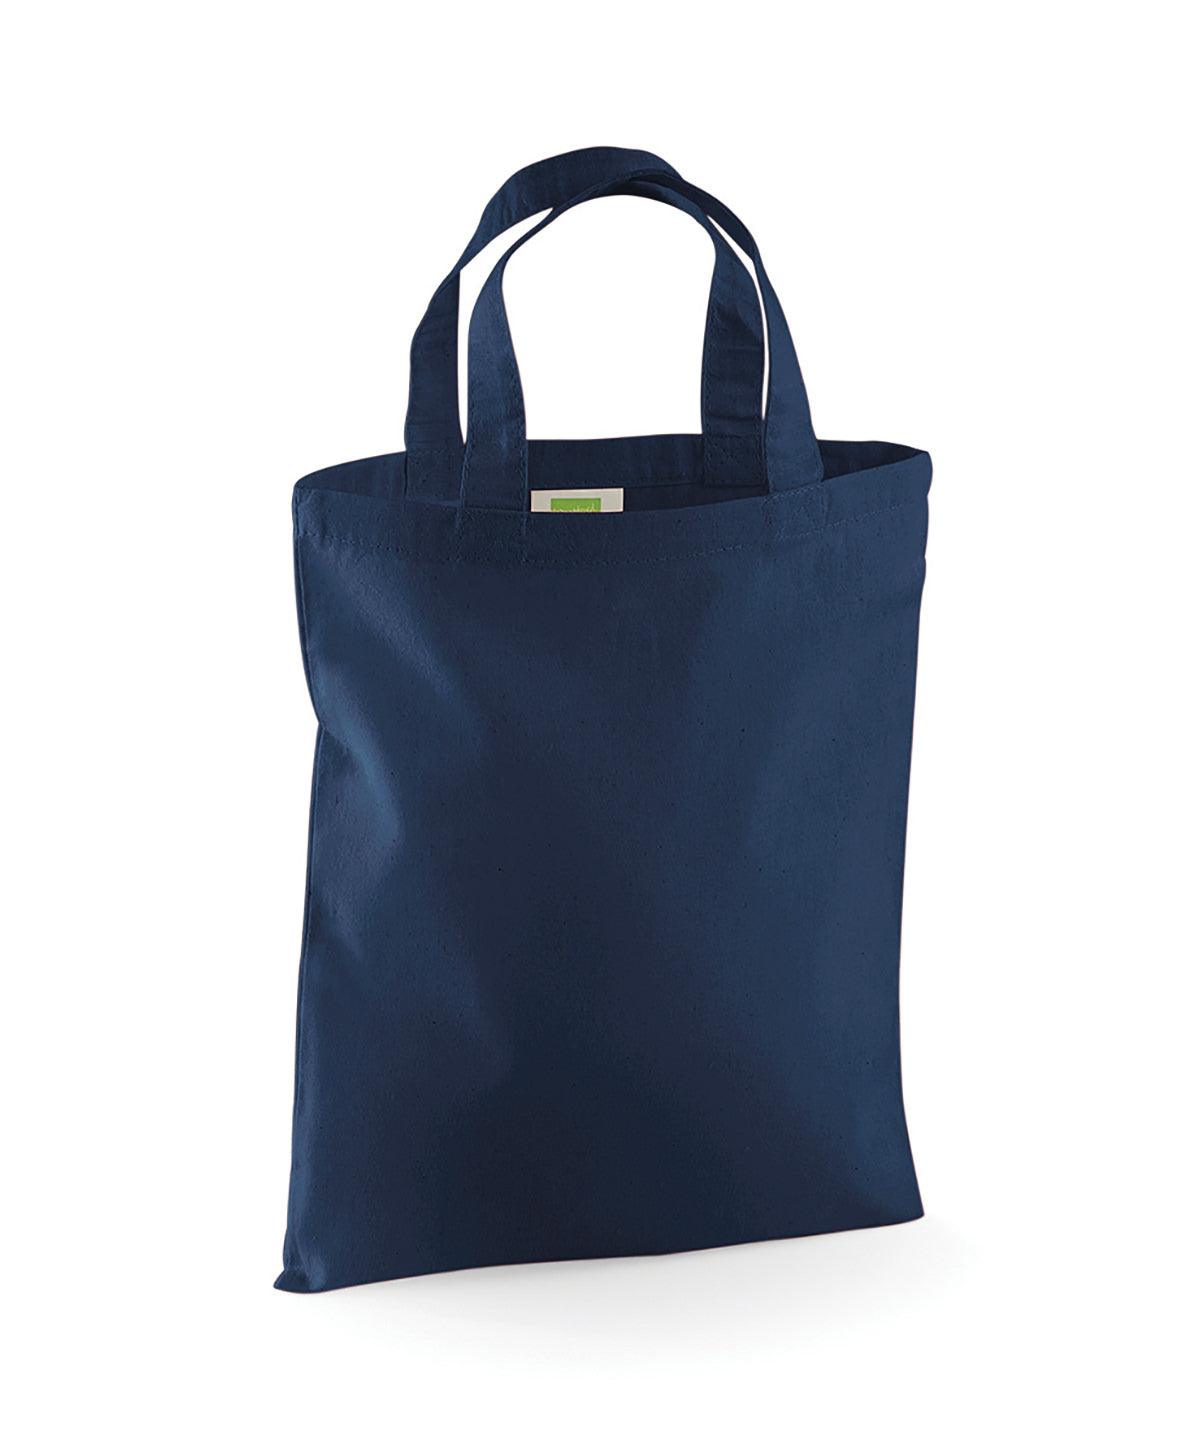 FrenchNavy - Mini bag for life Bags Westford Mill Bags & Luggage Schoolwear Centres